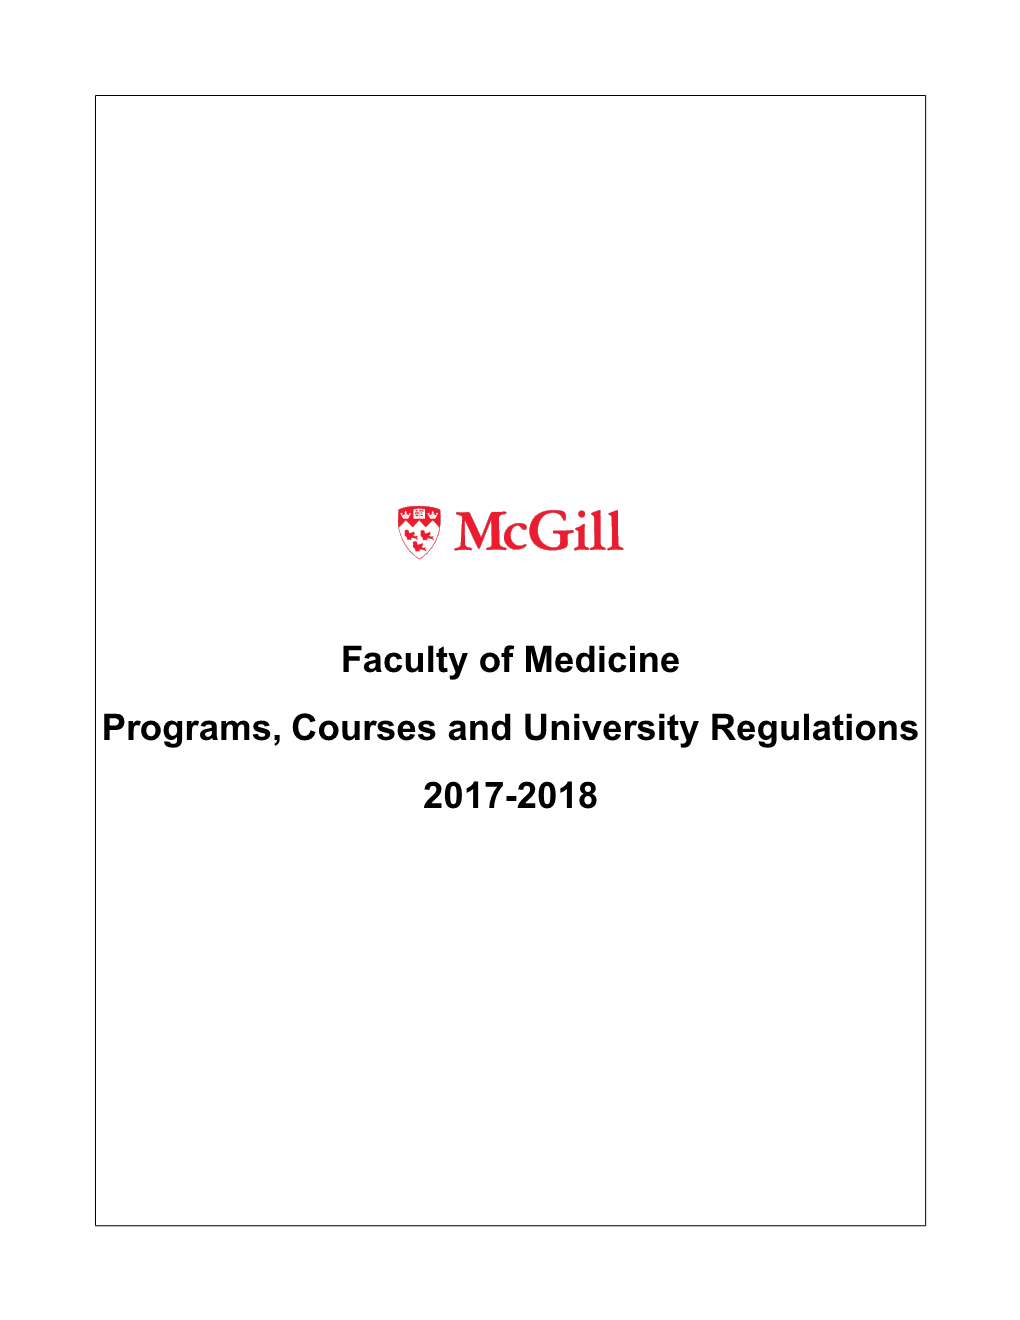 Faculty of Medicine Programs, Courses and University Regulations 2017-2018